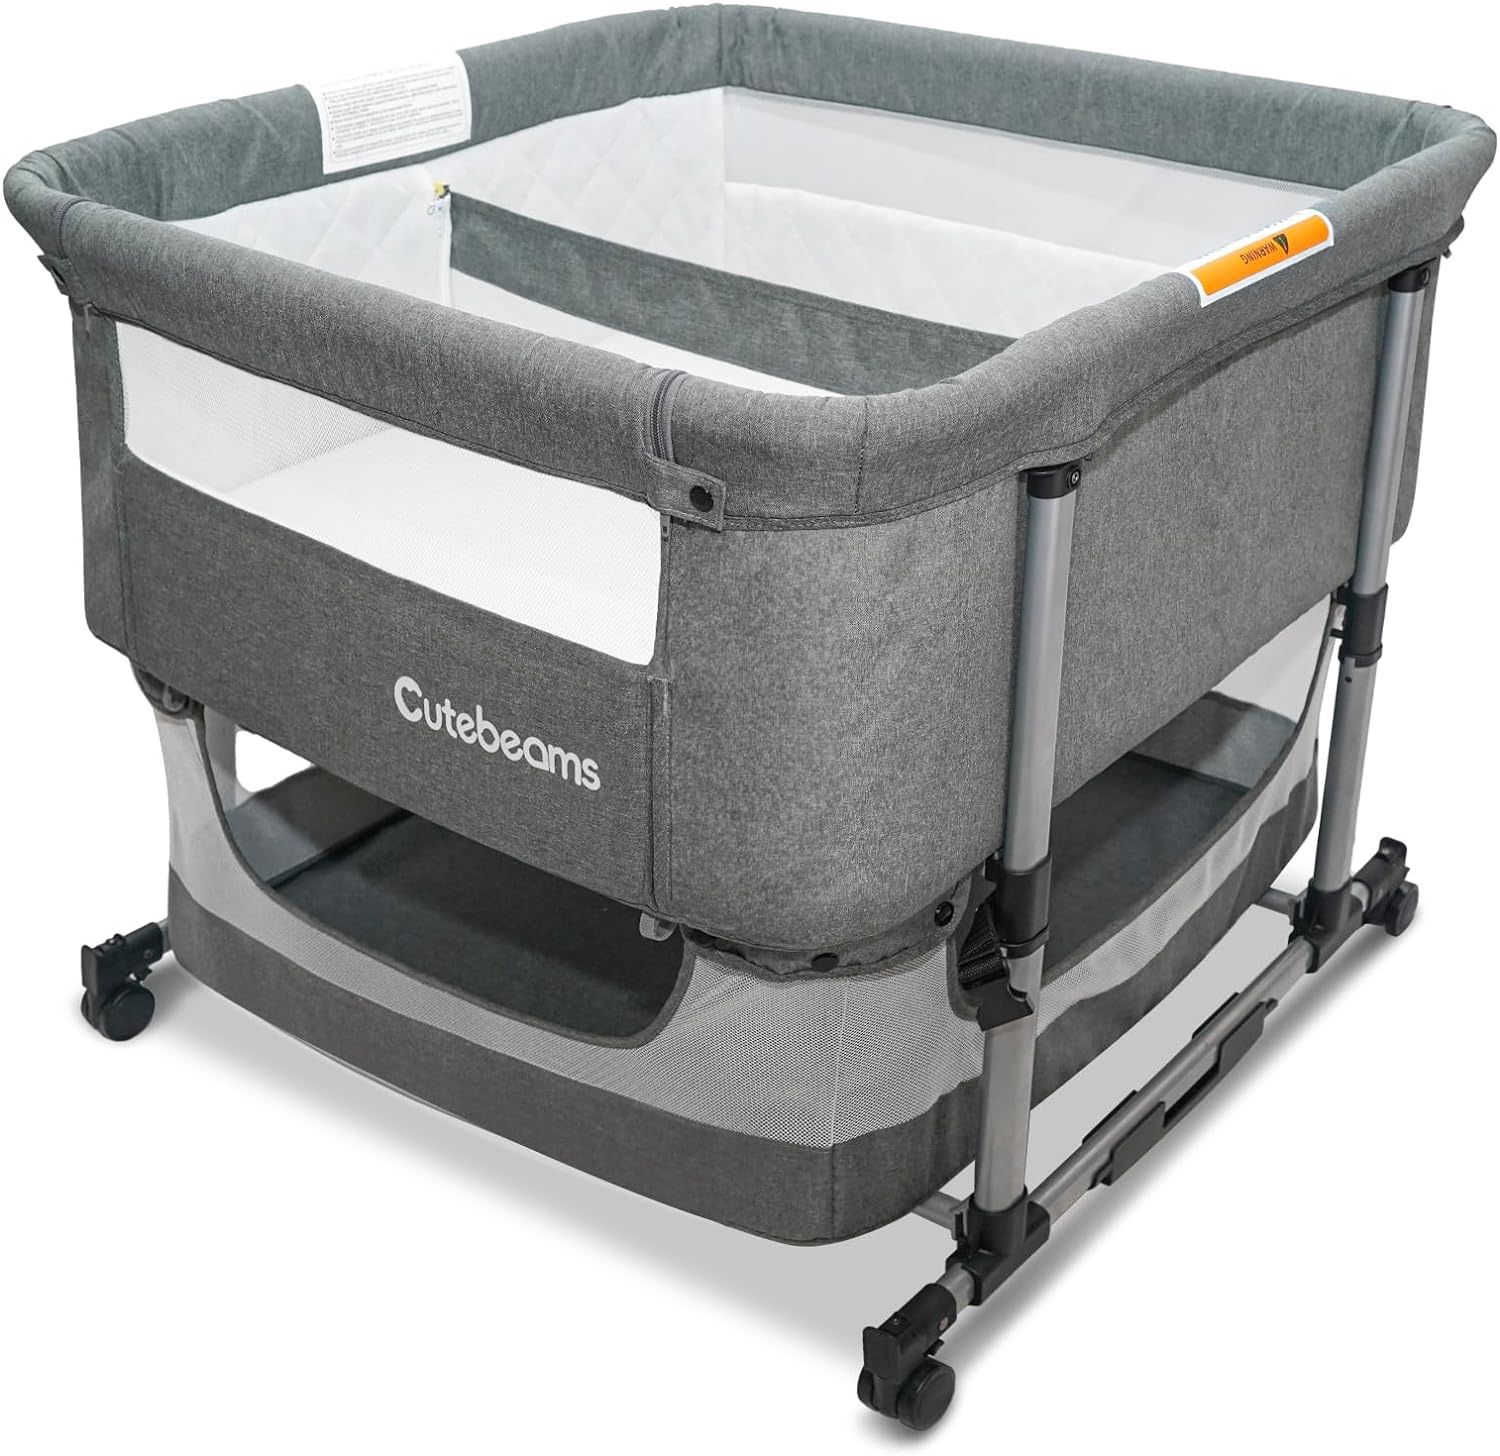 cutebeams 4.7 Twin Bassinet for 2 Babies, 3 in 1 Bedside Co Sleeper Double Bassinet for Twins, Rocking Bassinet for Baby with Wheels and Storage Baske